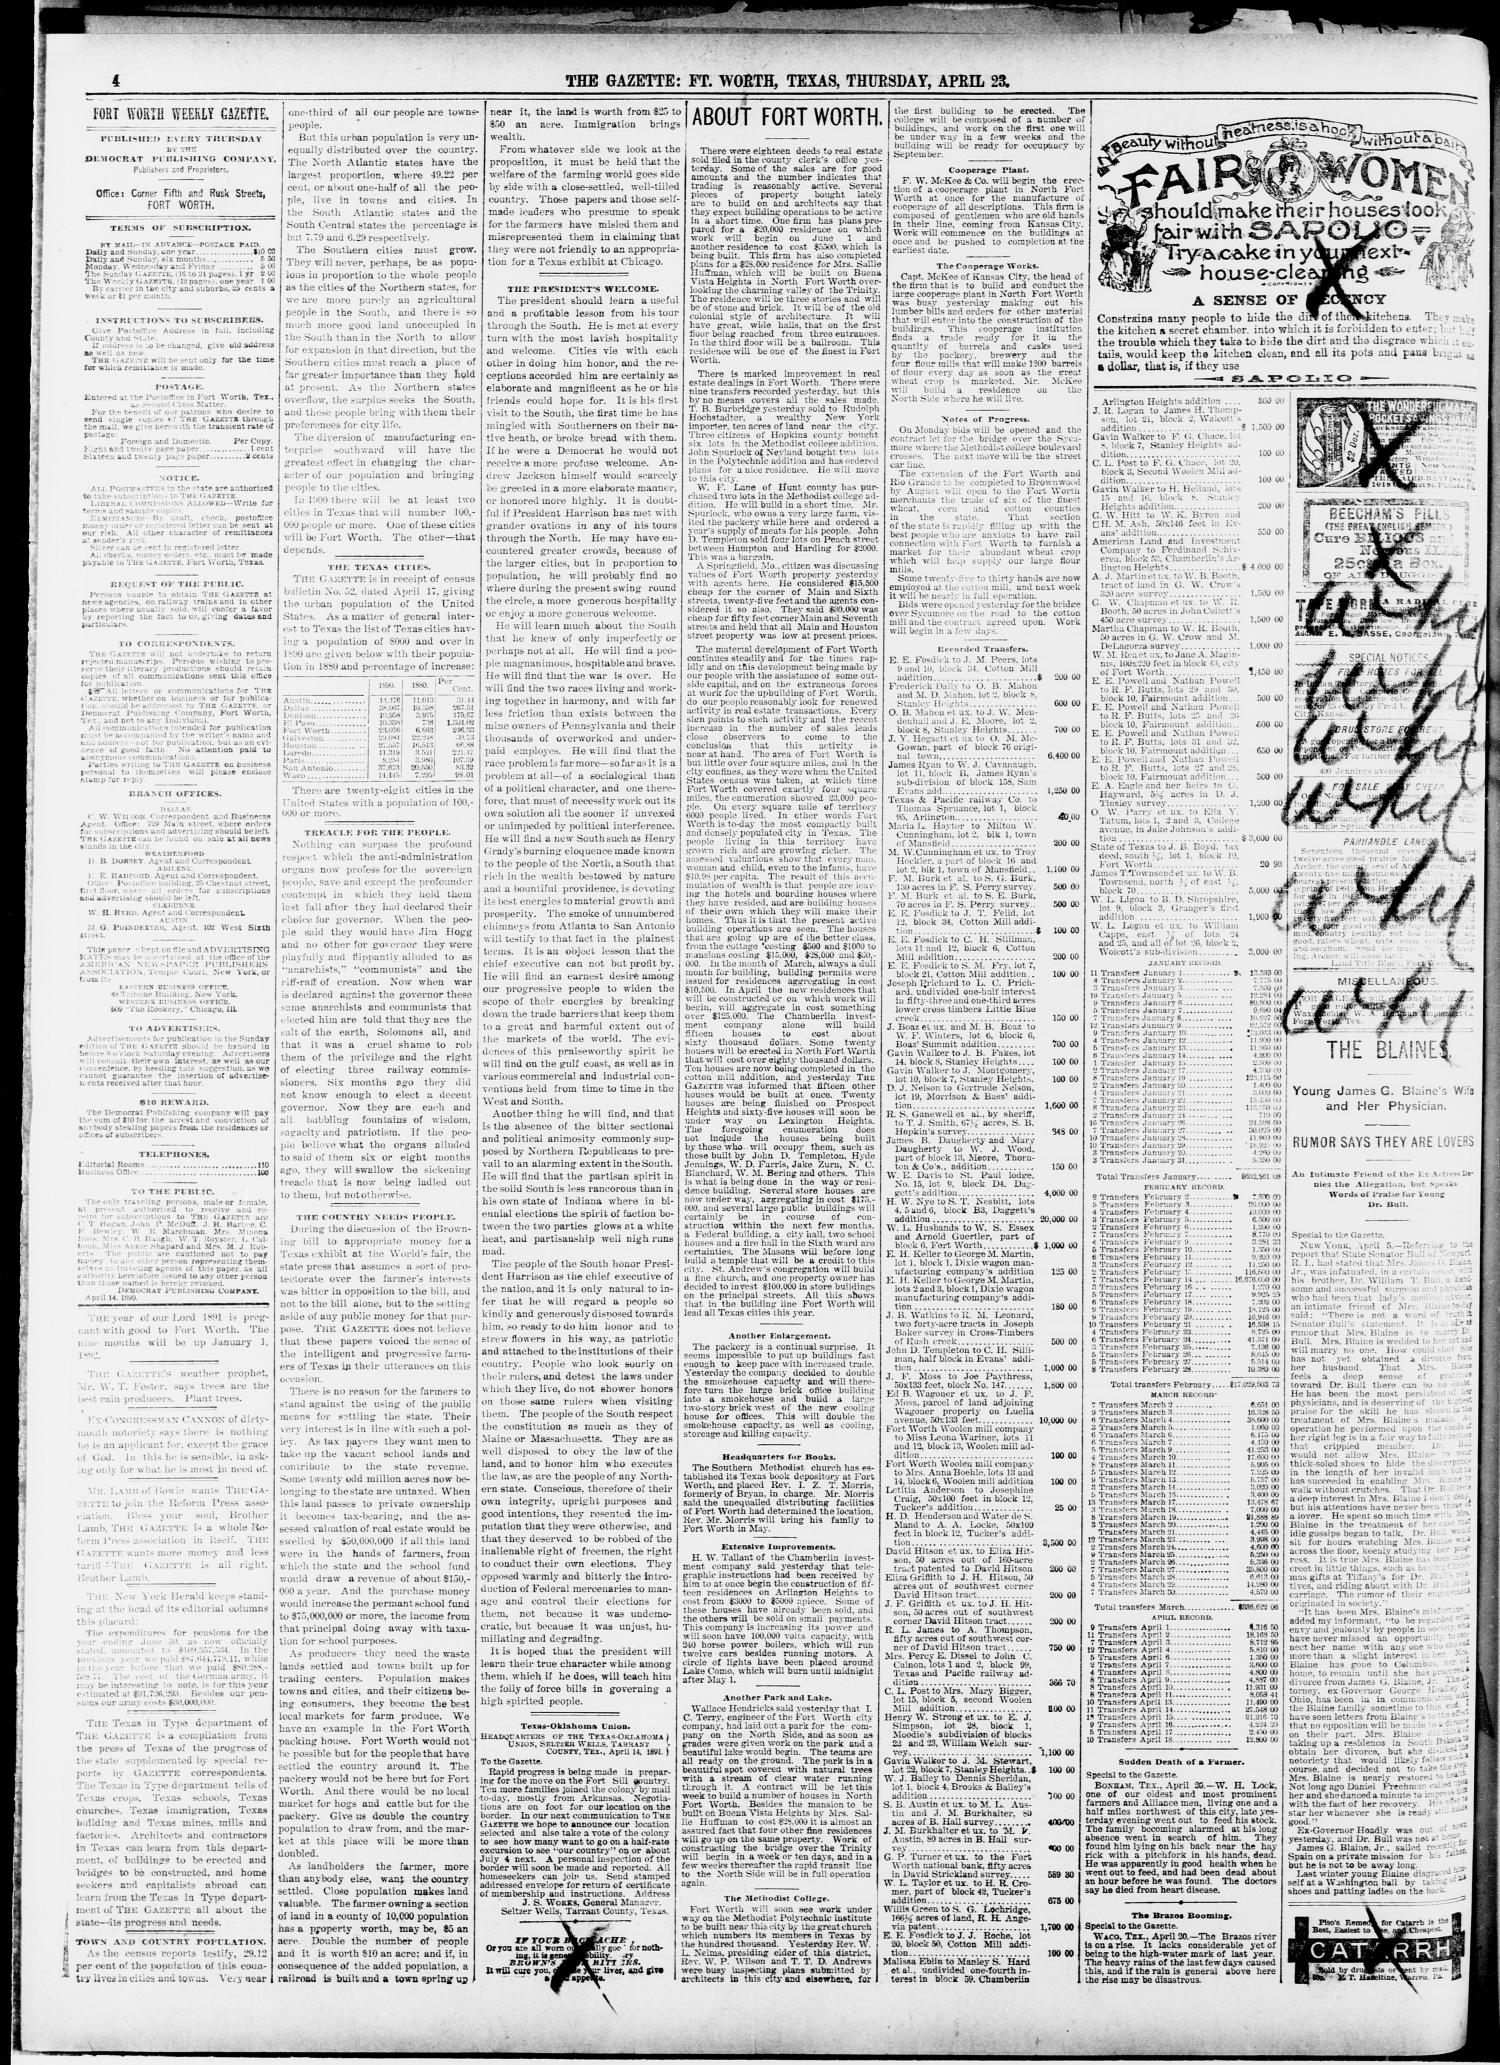 Fort Worth Gazette. (Fort Worth, Tex.), Vol. 13, No. 20, Ed. 1, Thursday, April 23, 1891
                                                
                                                    [Sequence #]: 4 of 20
                                                